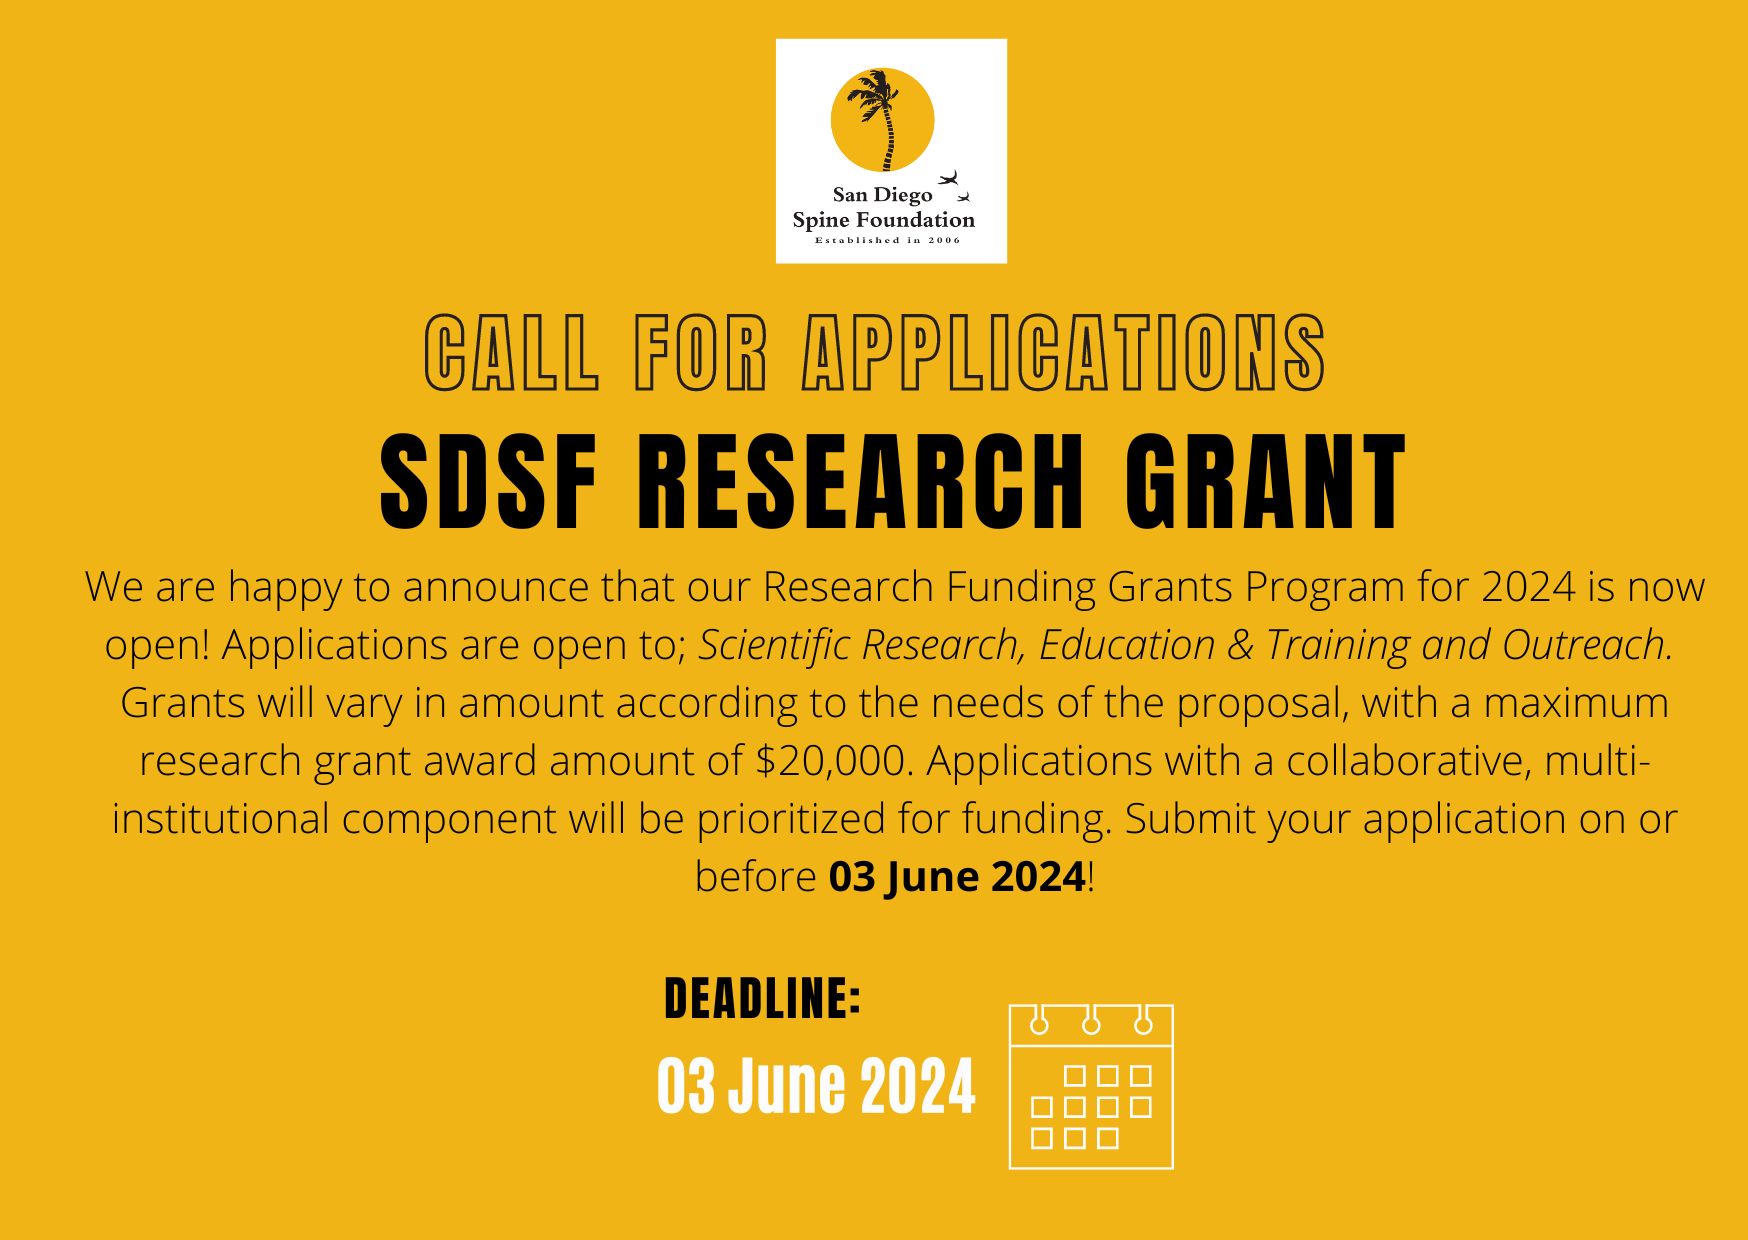 SDSF Research Grant (1).png